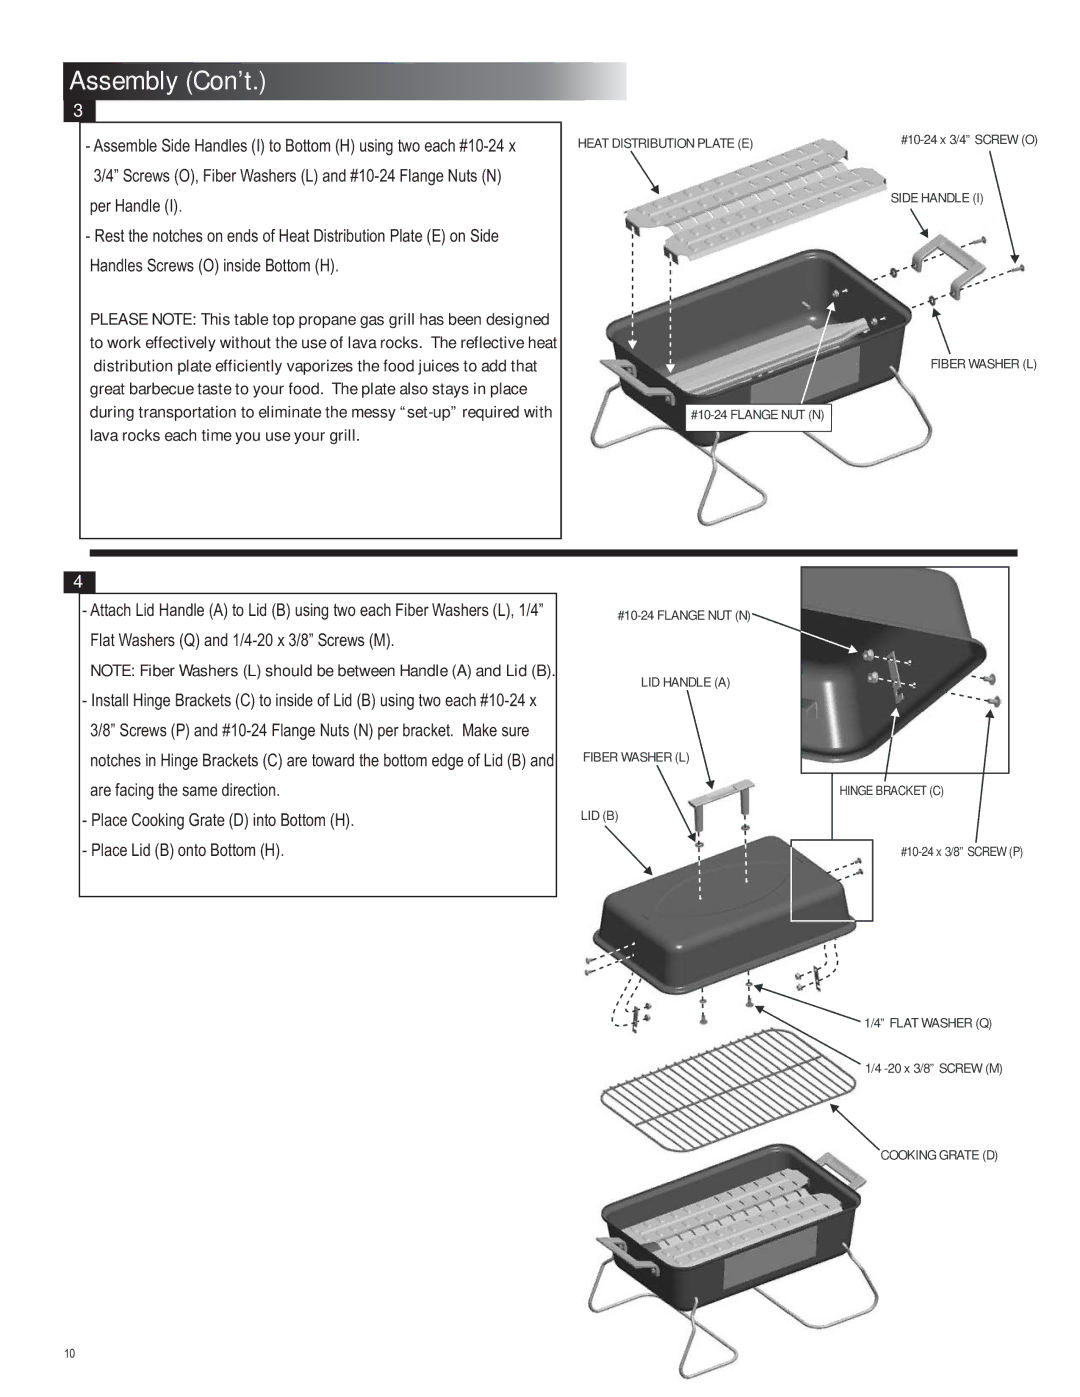 Char-Broil 4651330 manual Assembly Con’t 